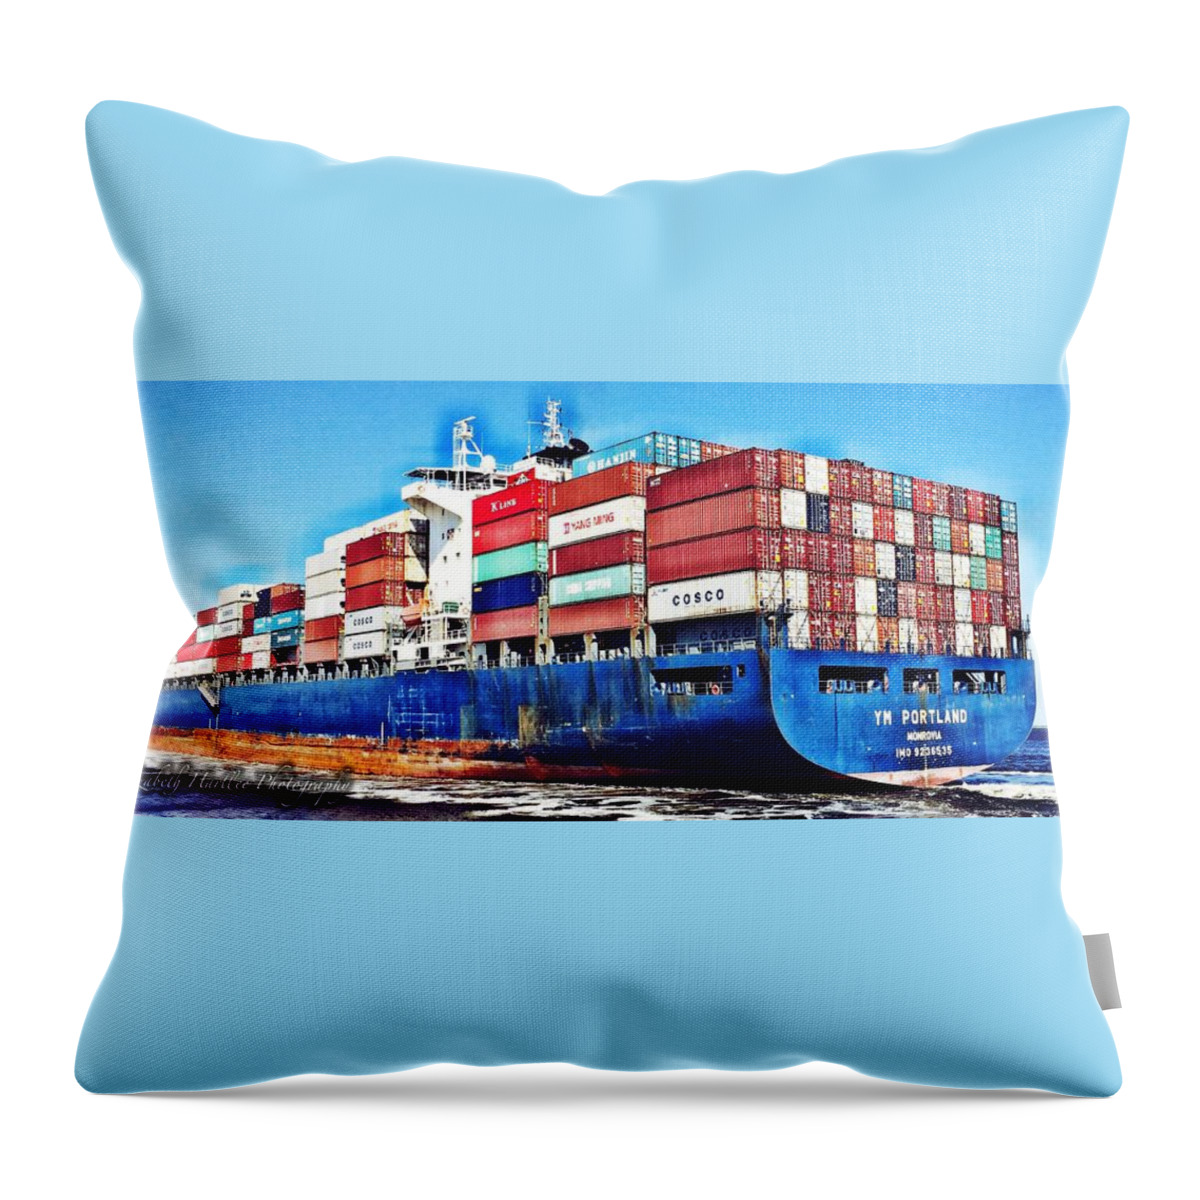  Throw Pillow featuring the photograph Cargo by Elizabeth Harllee